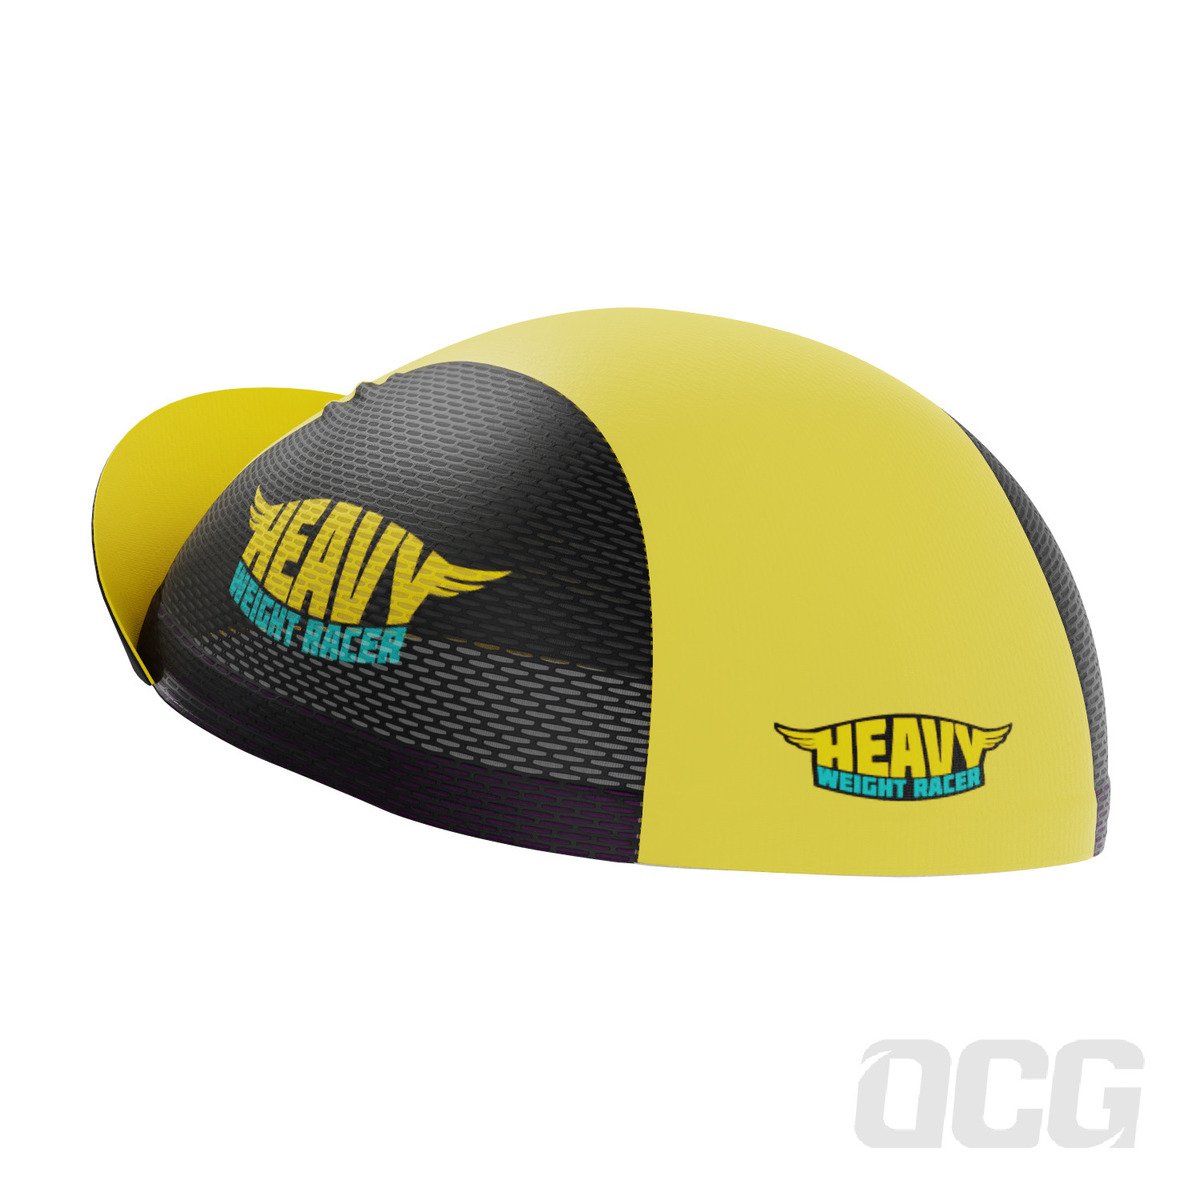 Unisex Heavy Weight Racer Quick-Dry Cycling Cap